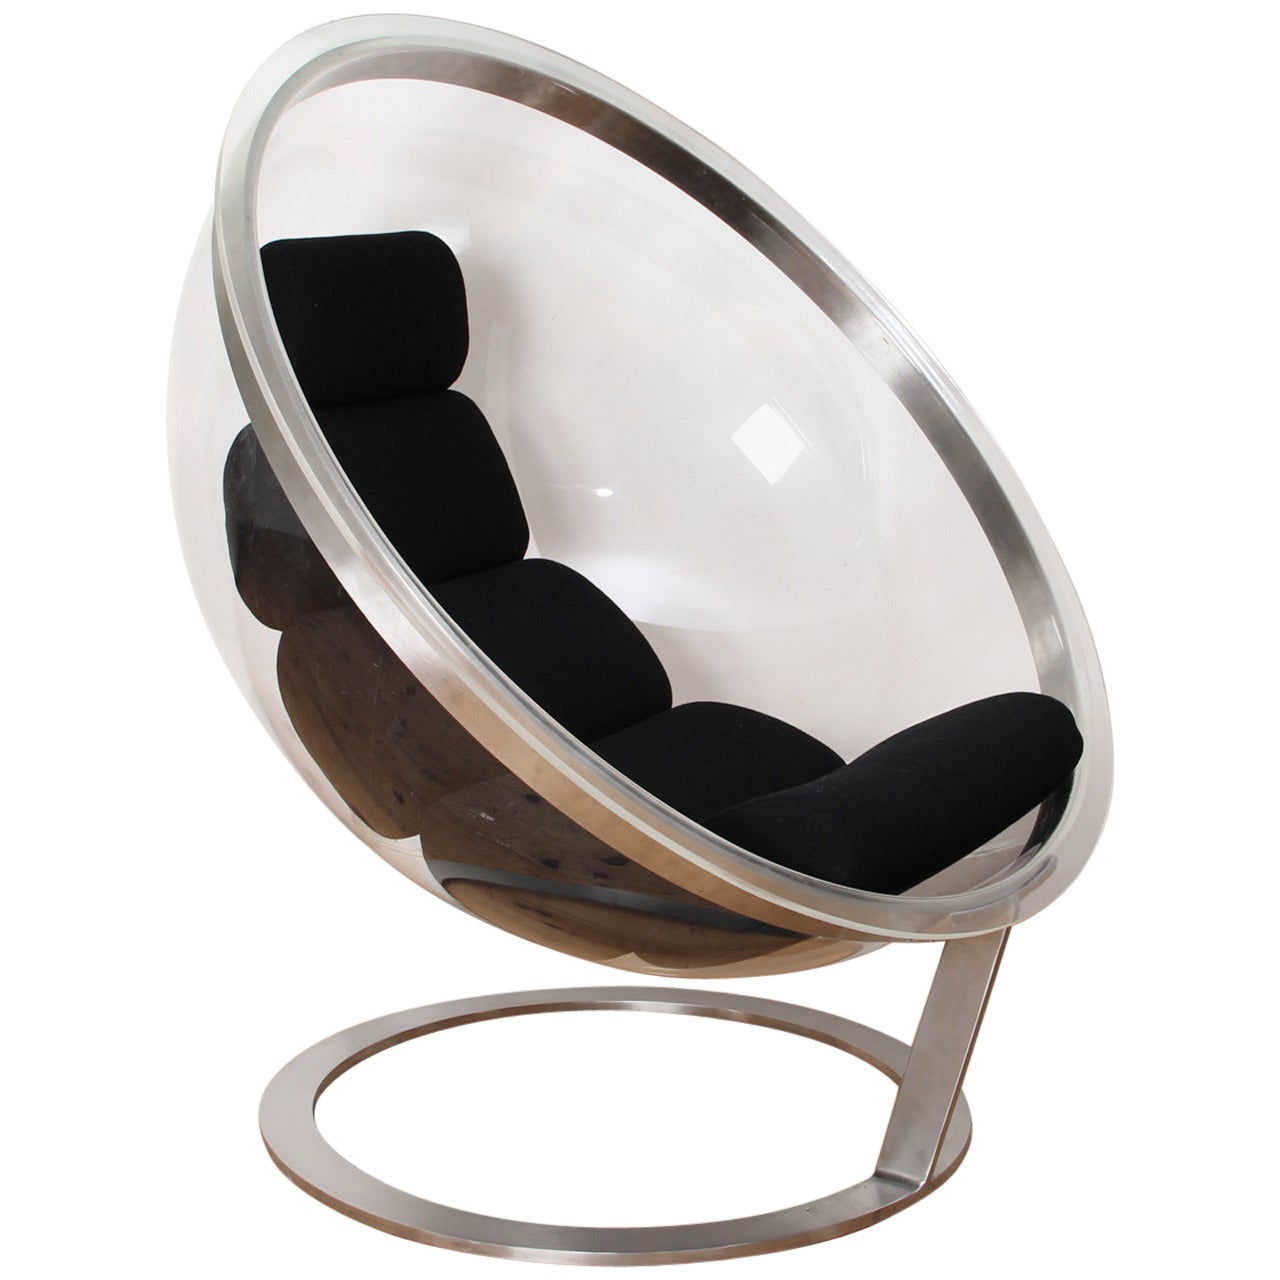 Bubble Lounge Chair by Christian Daninos, Edited by Formes Nouvelles in 1968